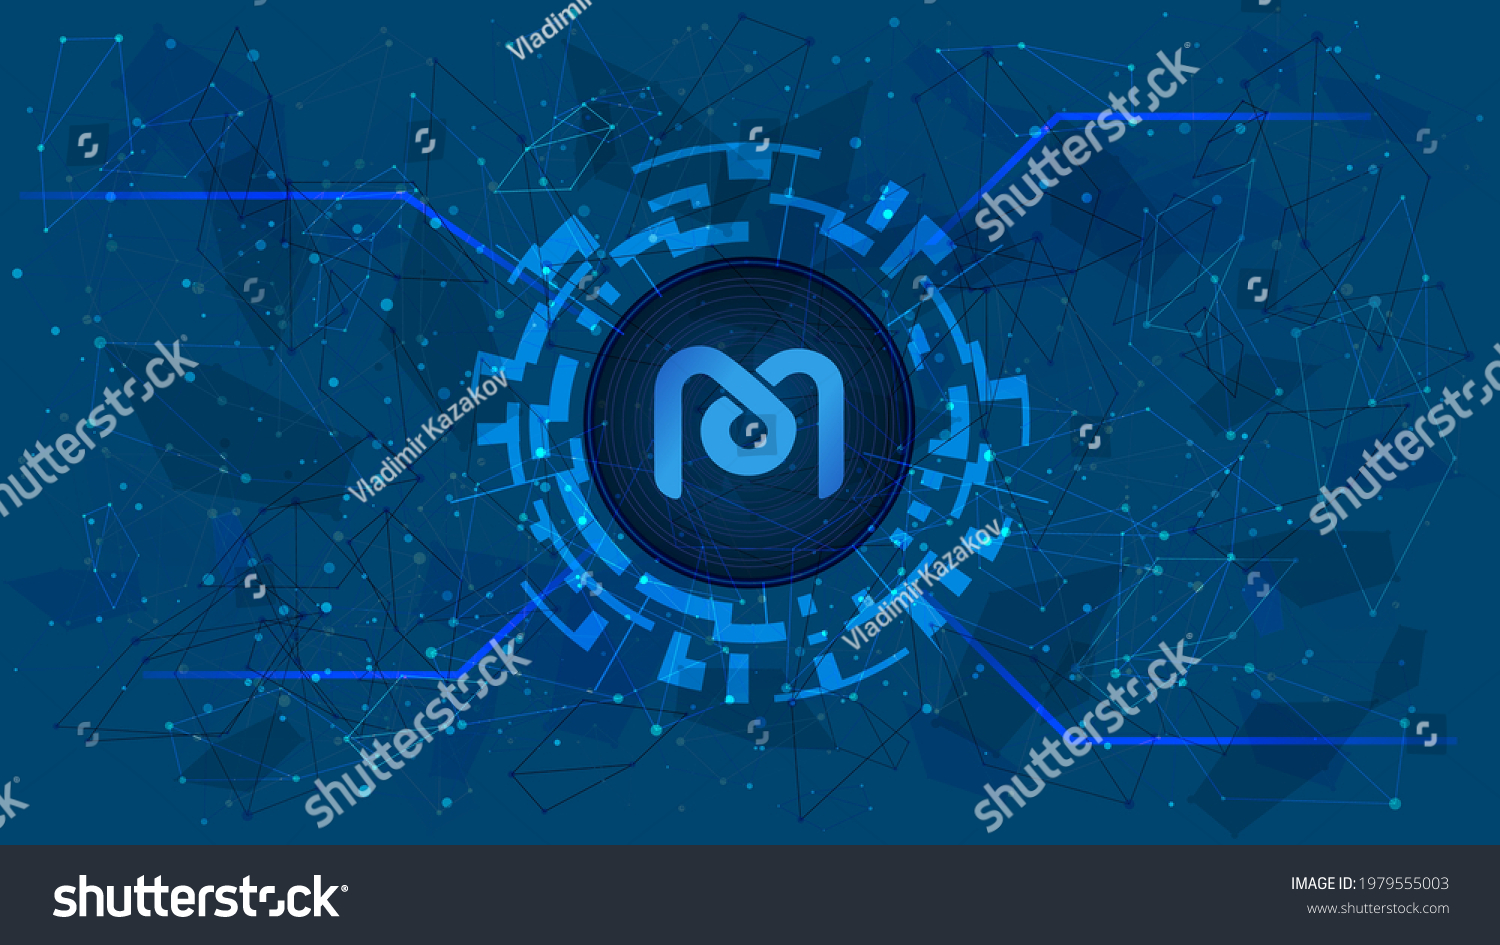 SVG of Mdex MDX token symbol of the DeFi project in digital circle with cryptocurrency theme on blue background. Cryptocurrency coin icon. Decentralized finance programs. Vector illustration. svg